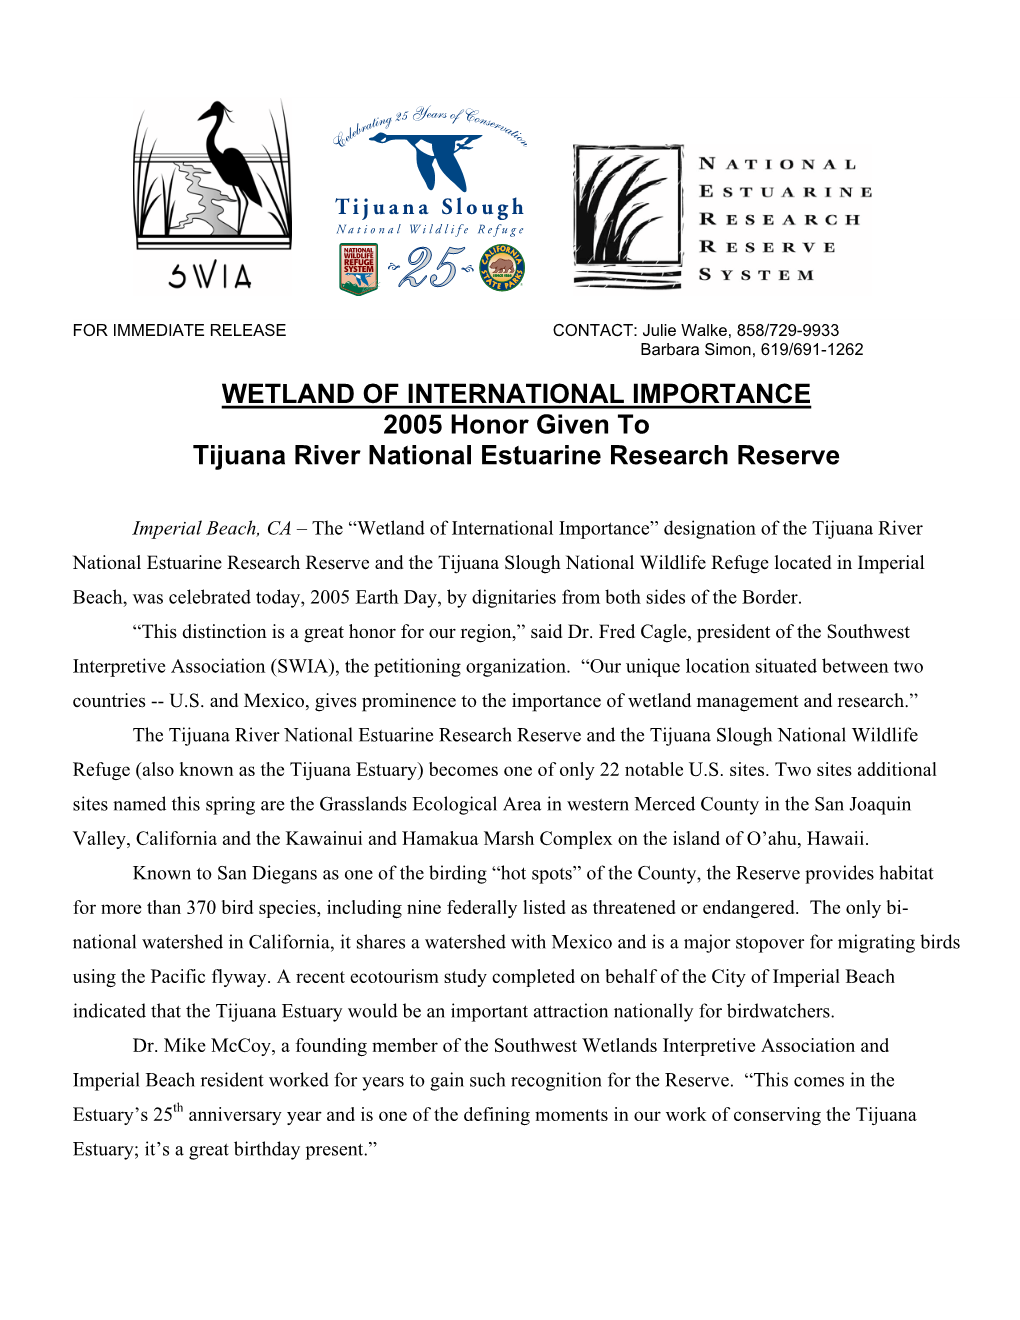 WETLAND of INTERNATIONAL IMPORTANCE 2005 Honor Given to Tijuana River National Estuarine Research Reserve